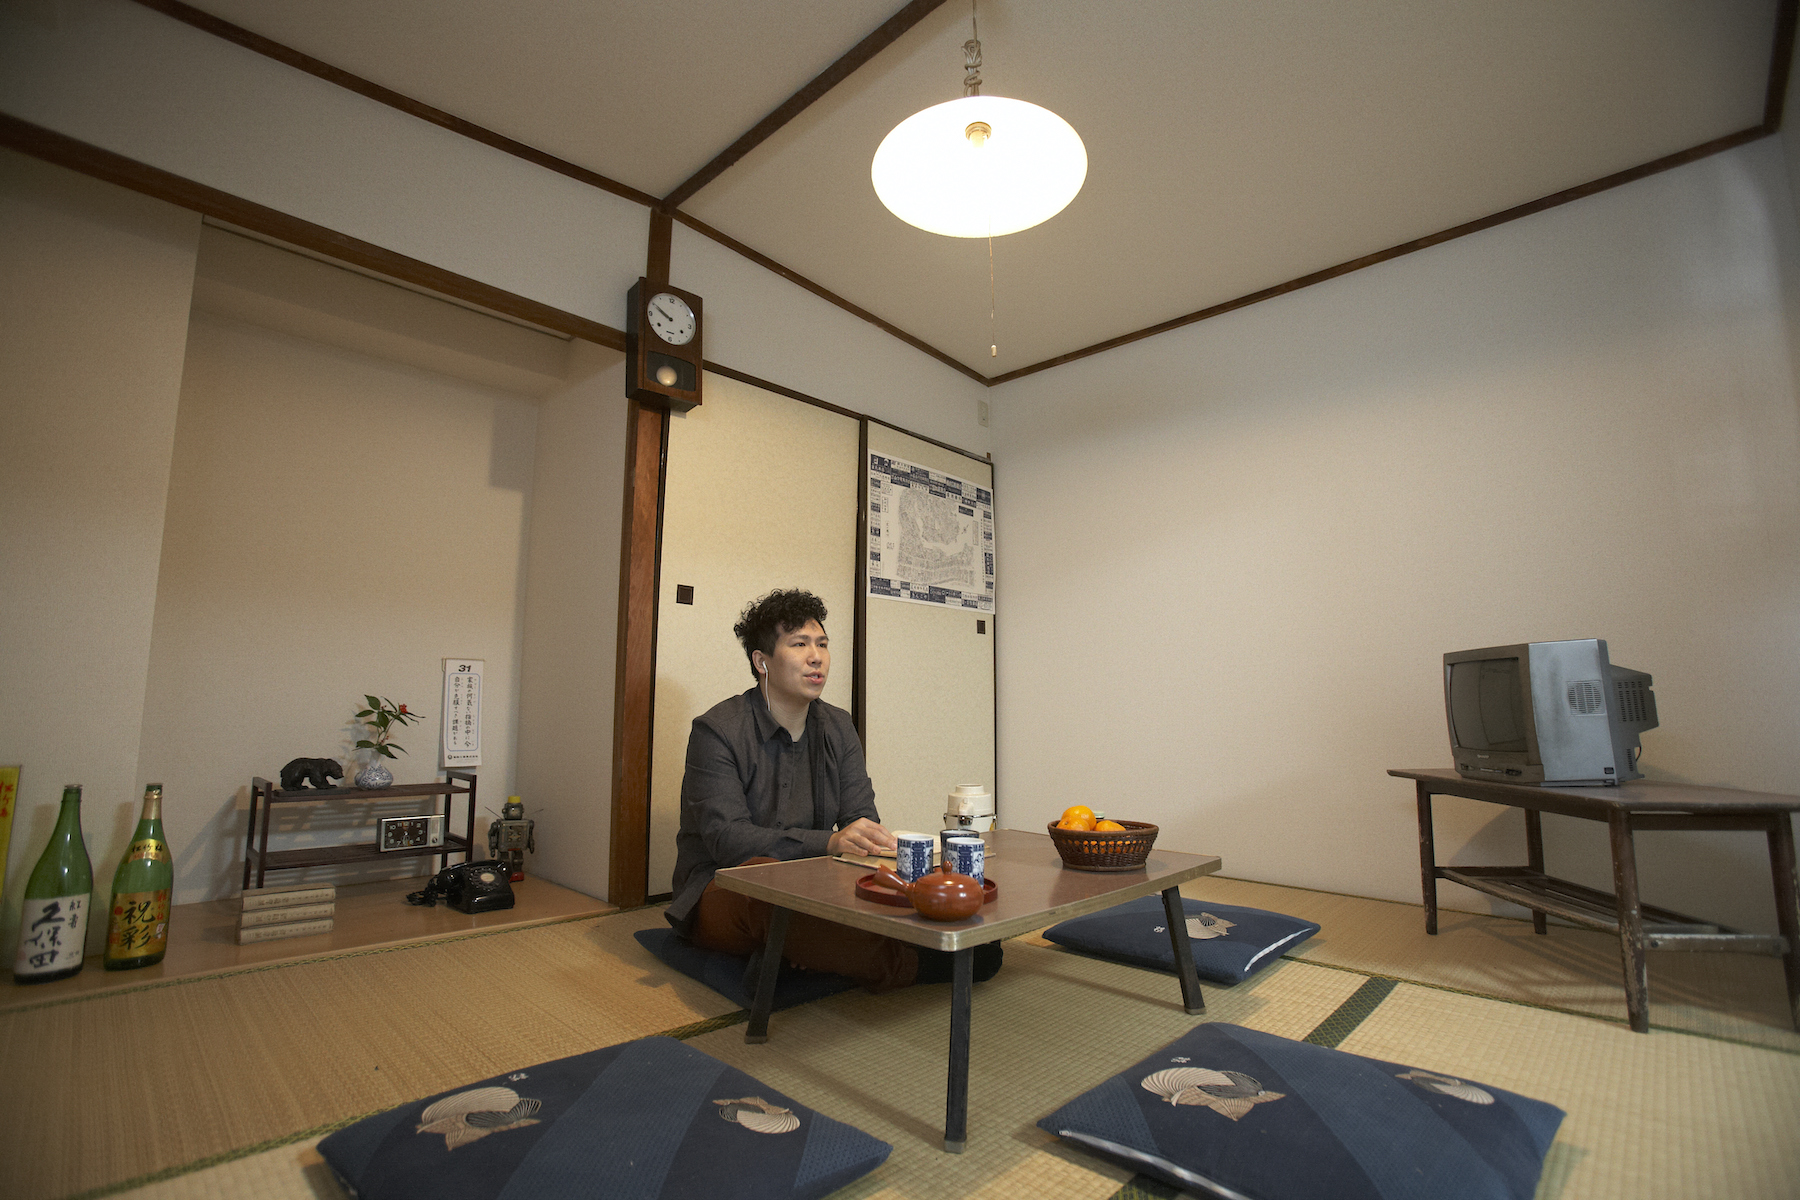 My video performance filmed in a rebuilt Japanese style living room during the art residency in Koganecho in Feb 2012.